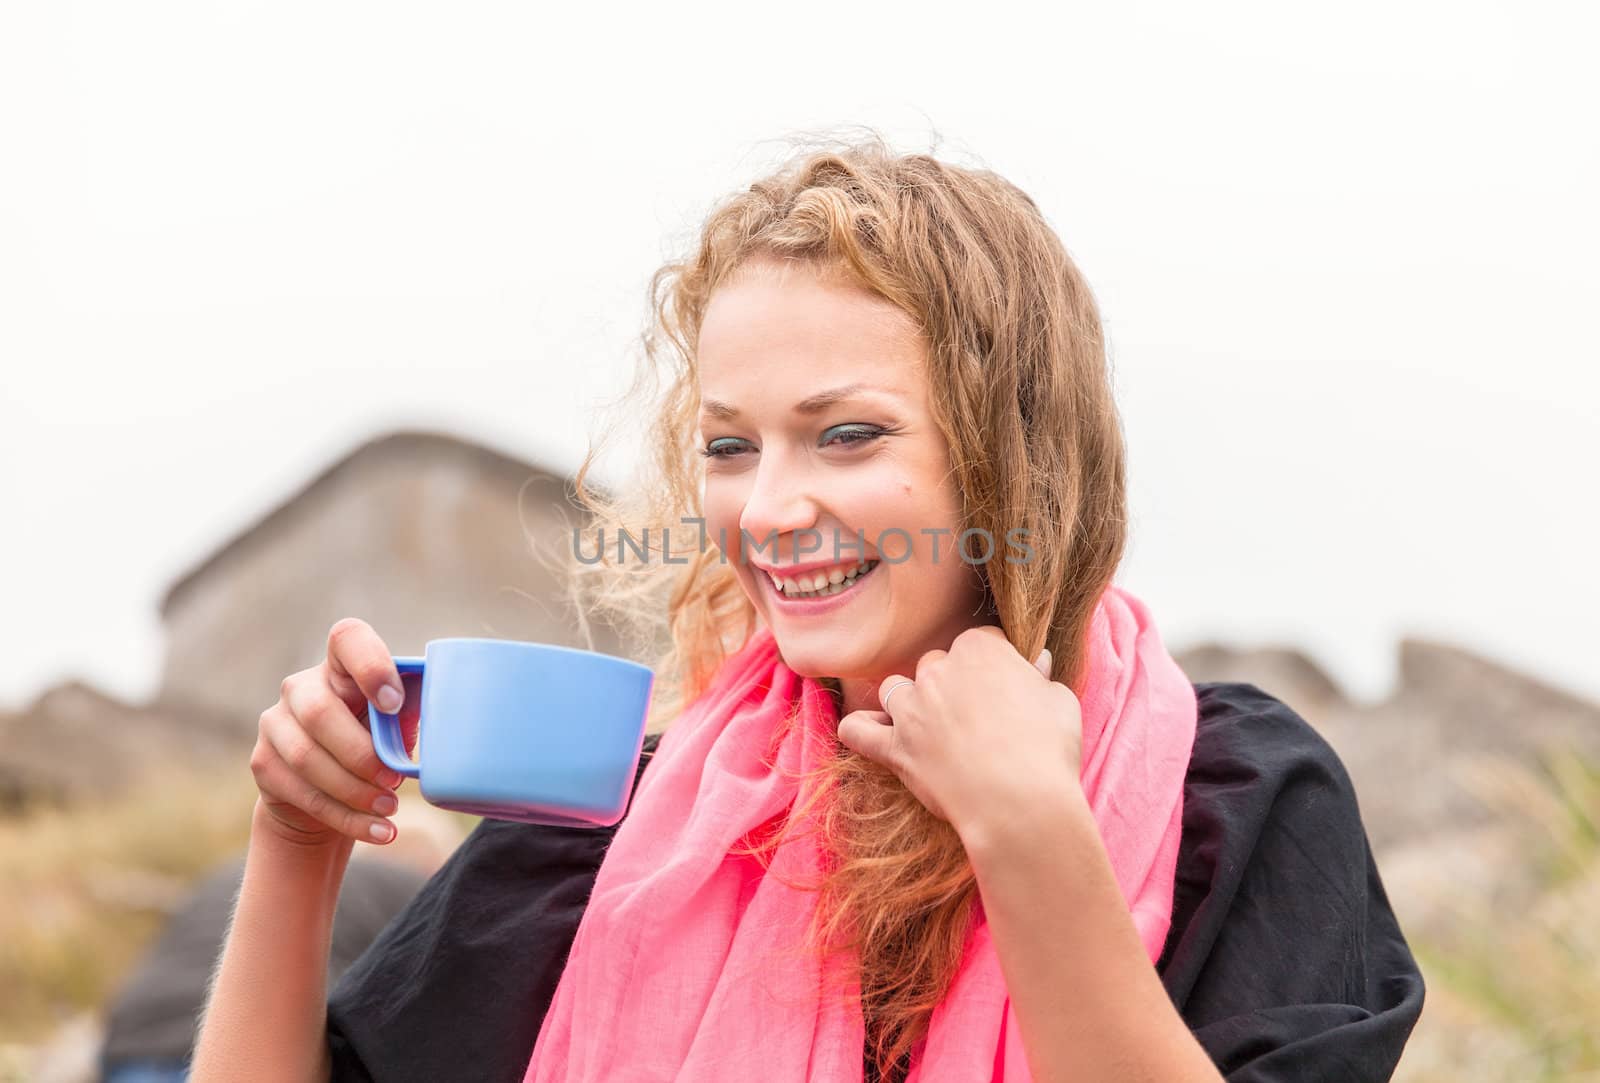  smiling woman drinking coffee outdoors by palinchak